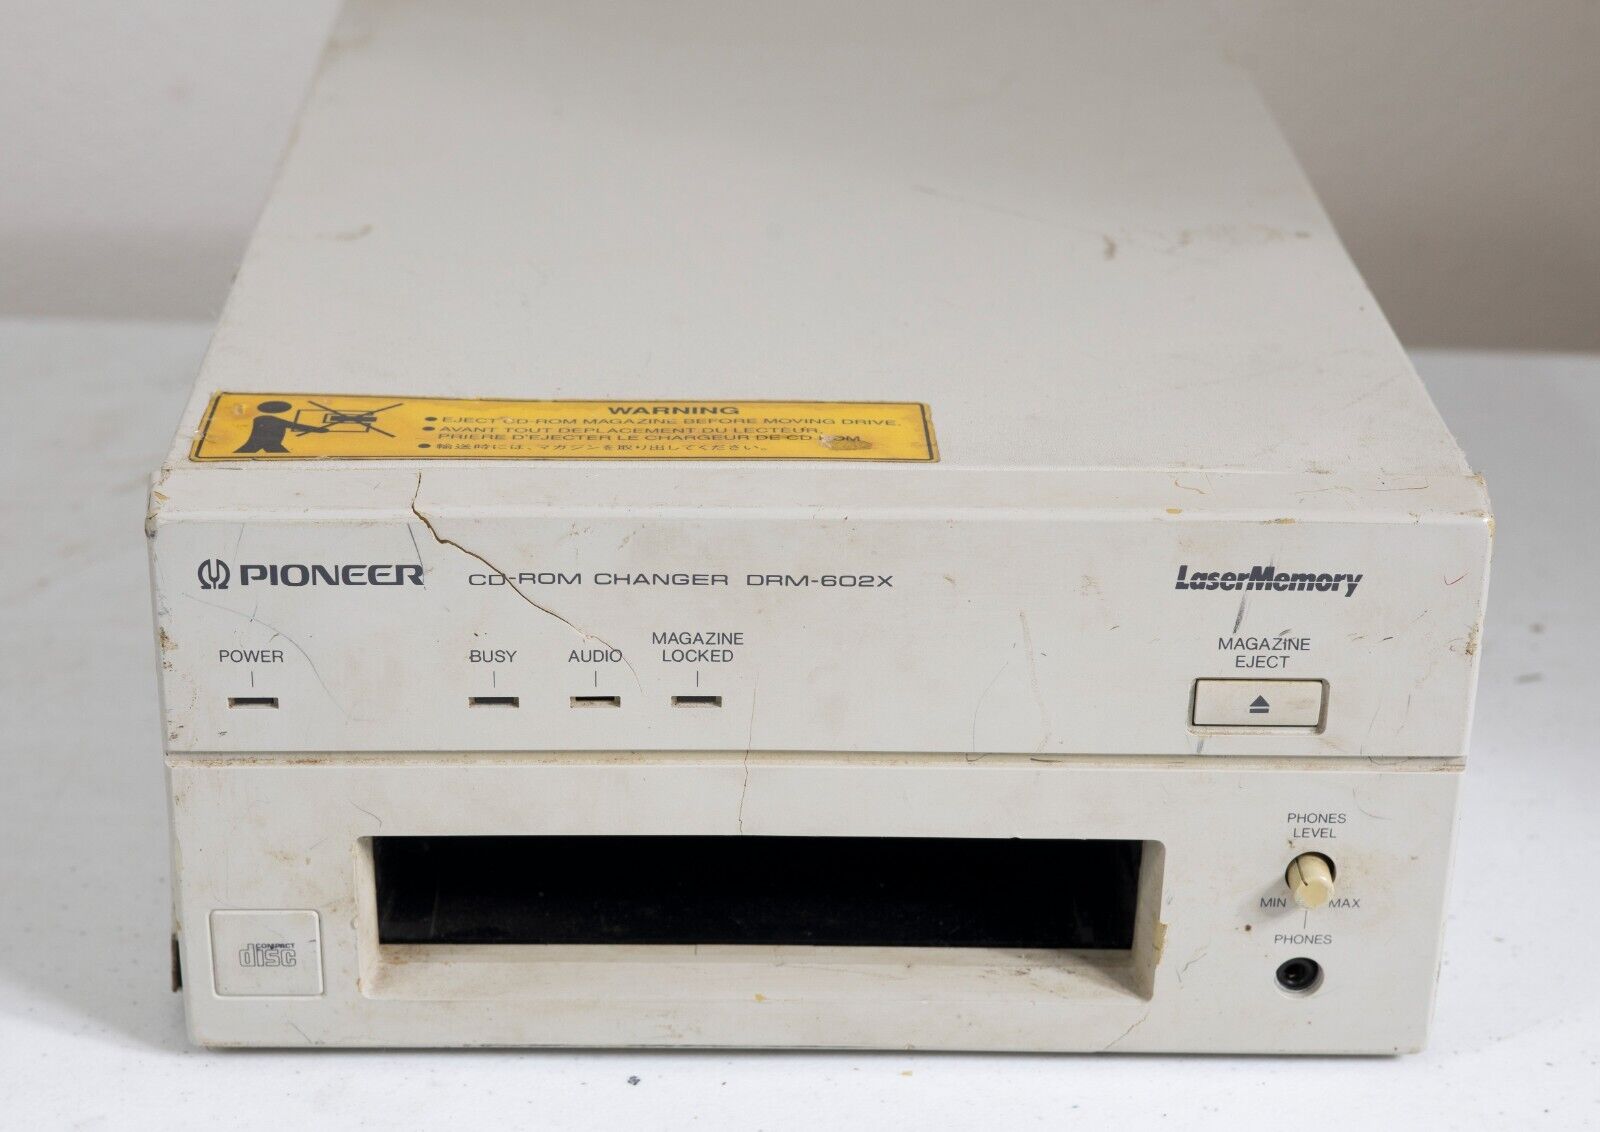 Vintage Pioneer CD-ROM Changer DRM-602X 2x 6 disc changer